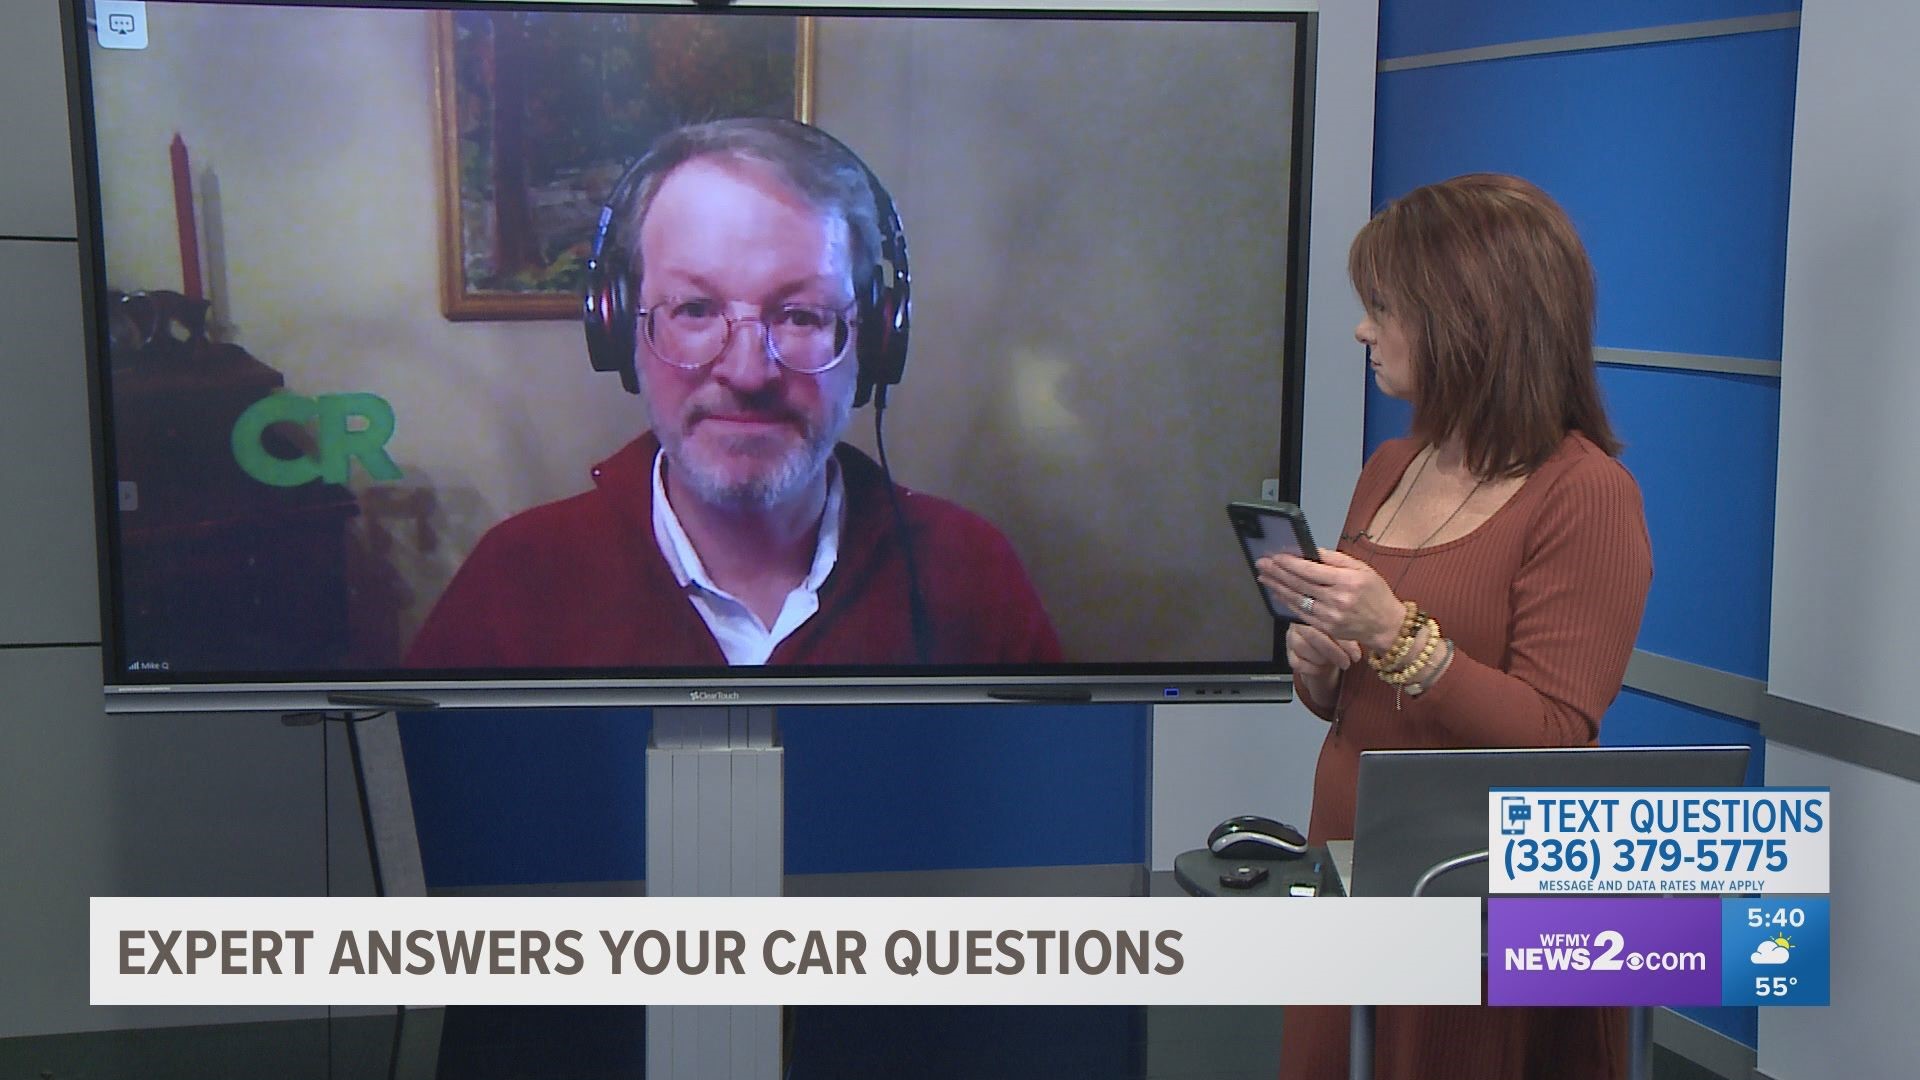 Consumer Reports’ Mike Quincy breaks down how to make a realistic repair estimate and find the best shop.